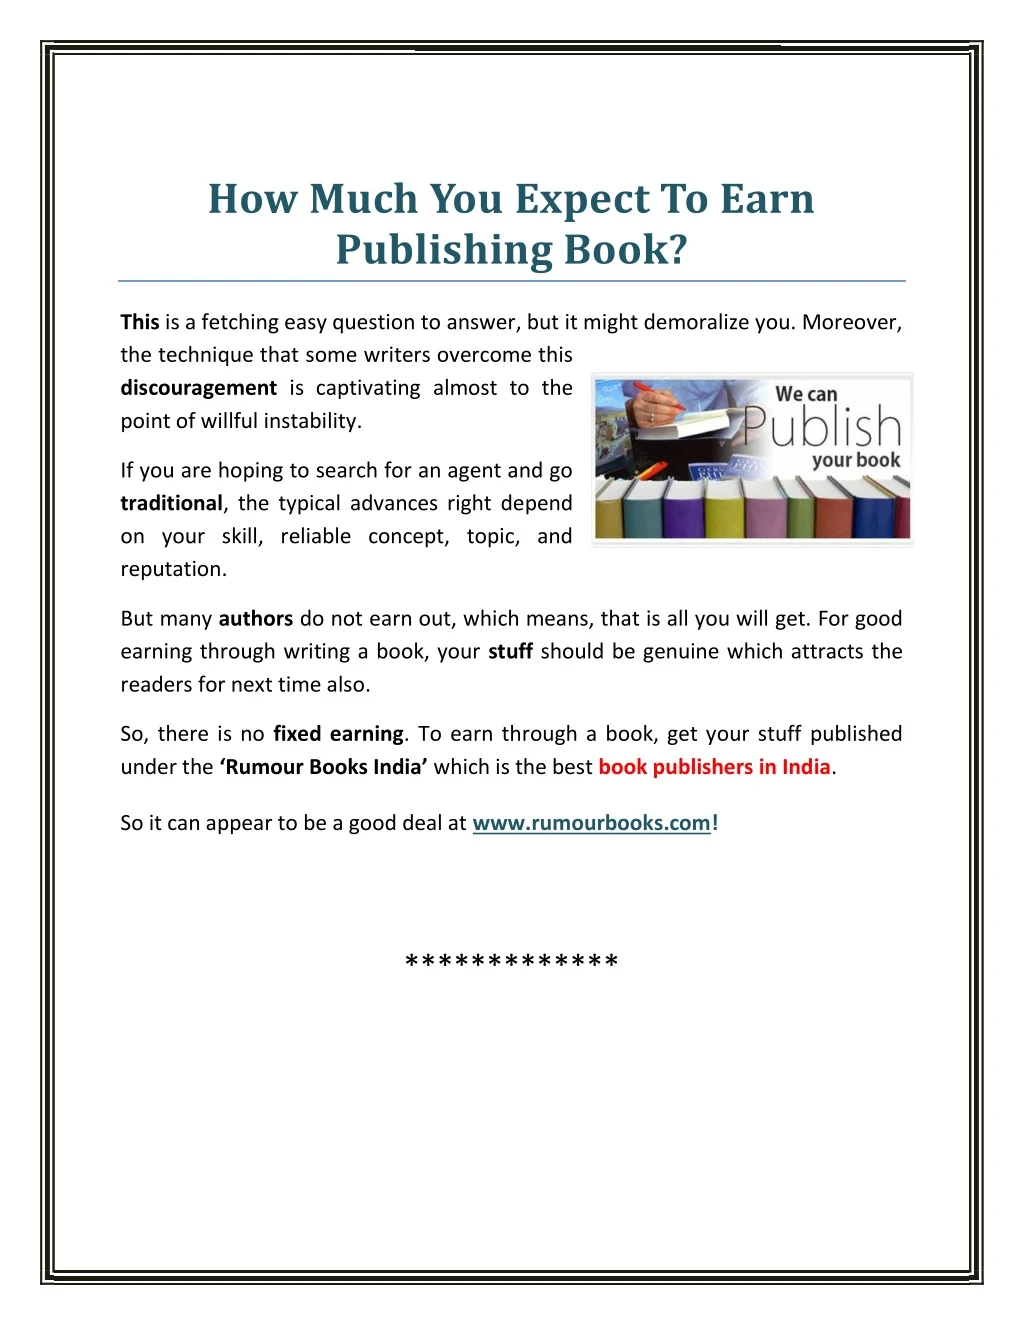 how much you expect to earn publishing book